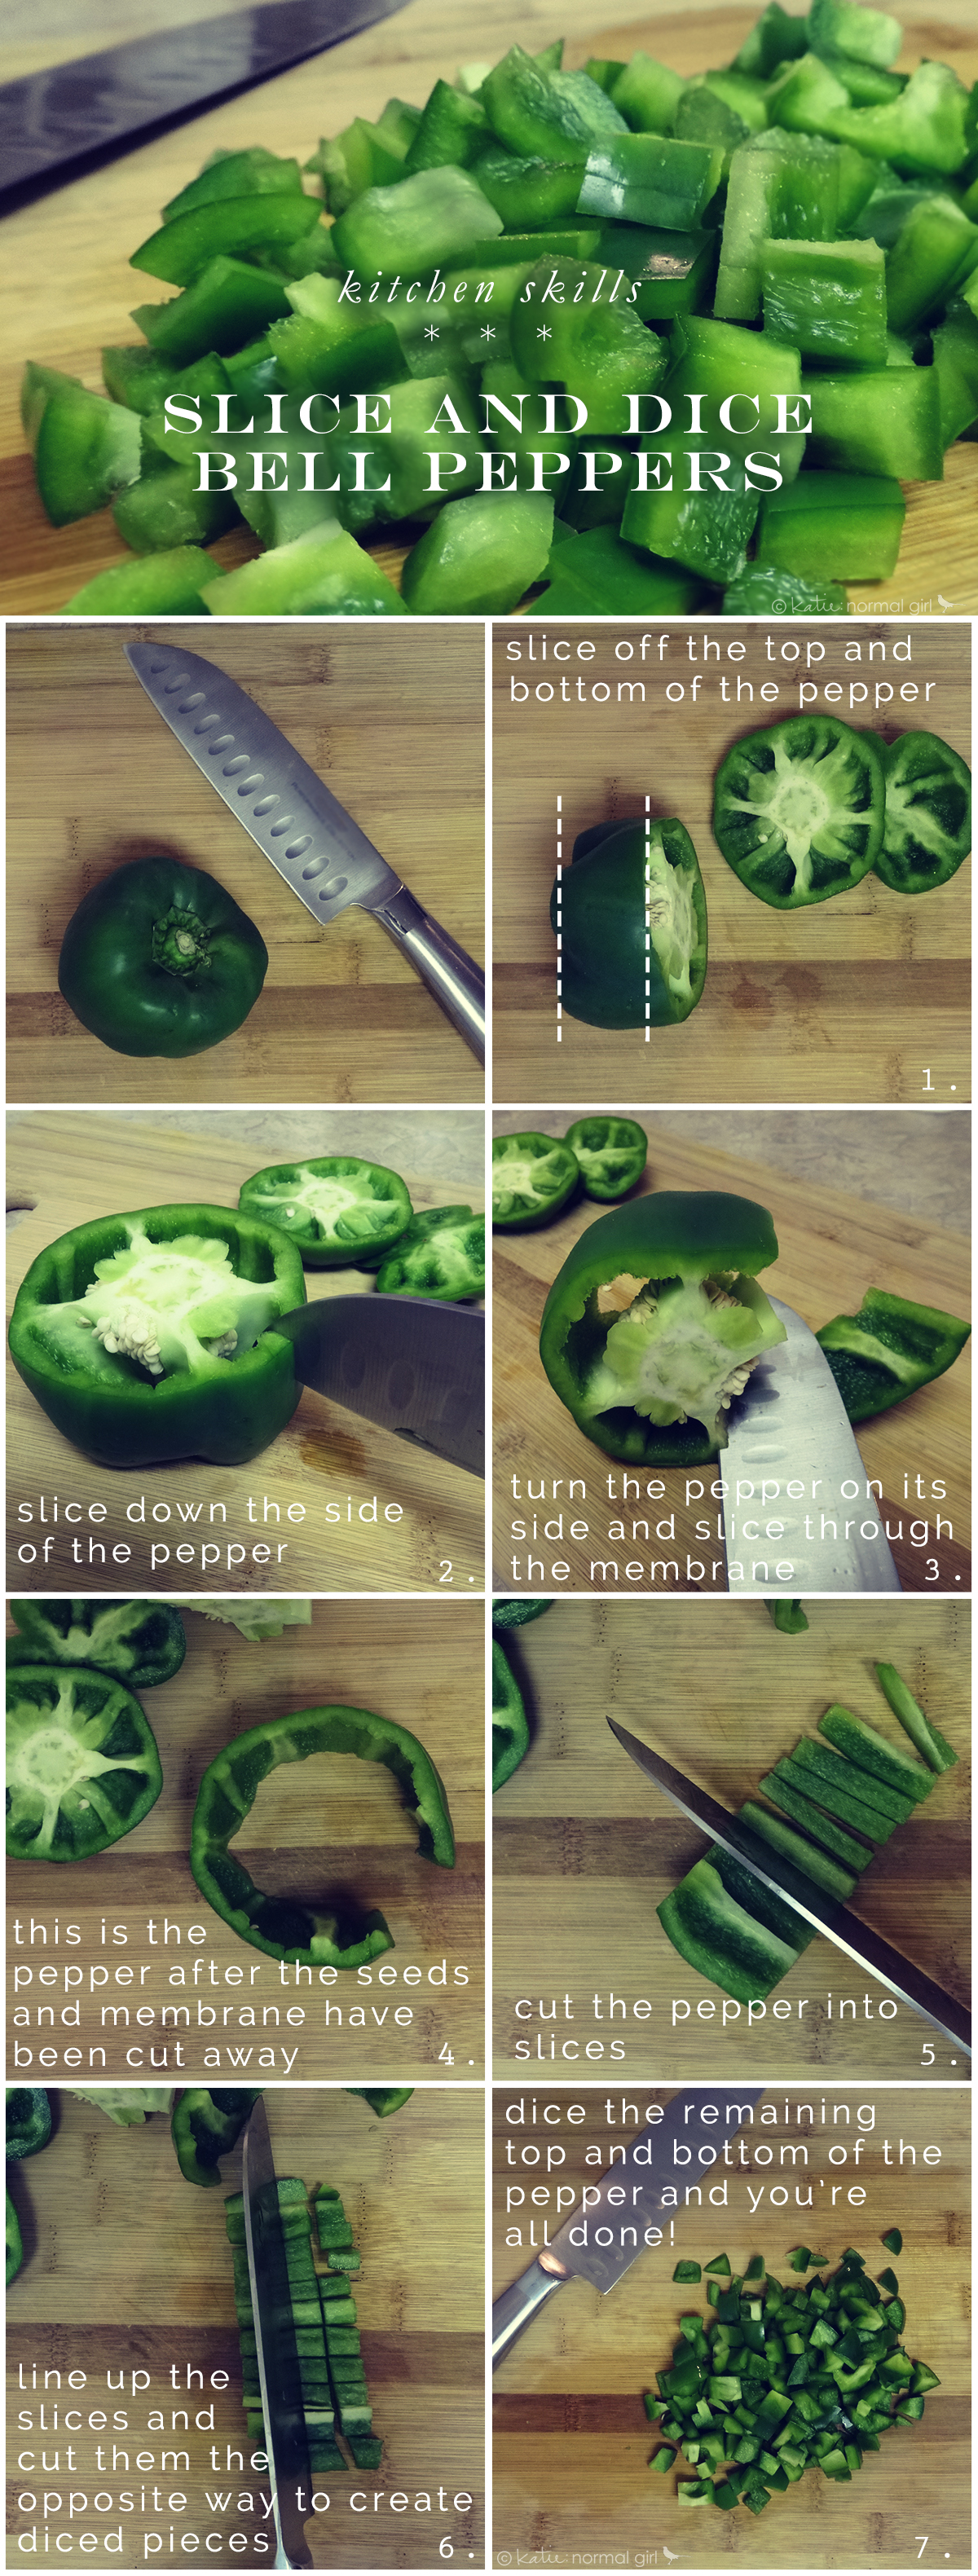 http://katienormalgirl.com/wp-content/uploads/2014/01/How-to-slice-and-dice-a-bell-pepper-from-katienormalgirl.com_.jpg